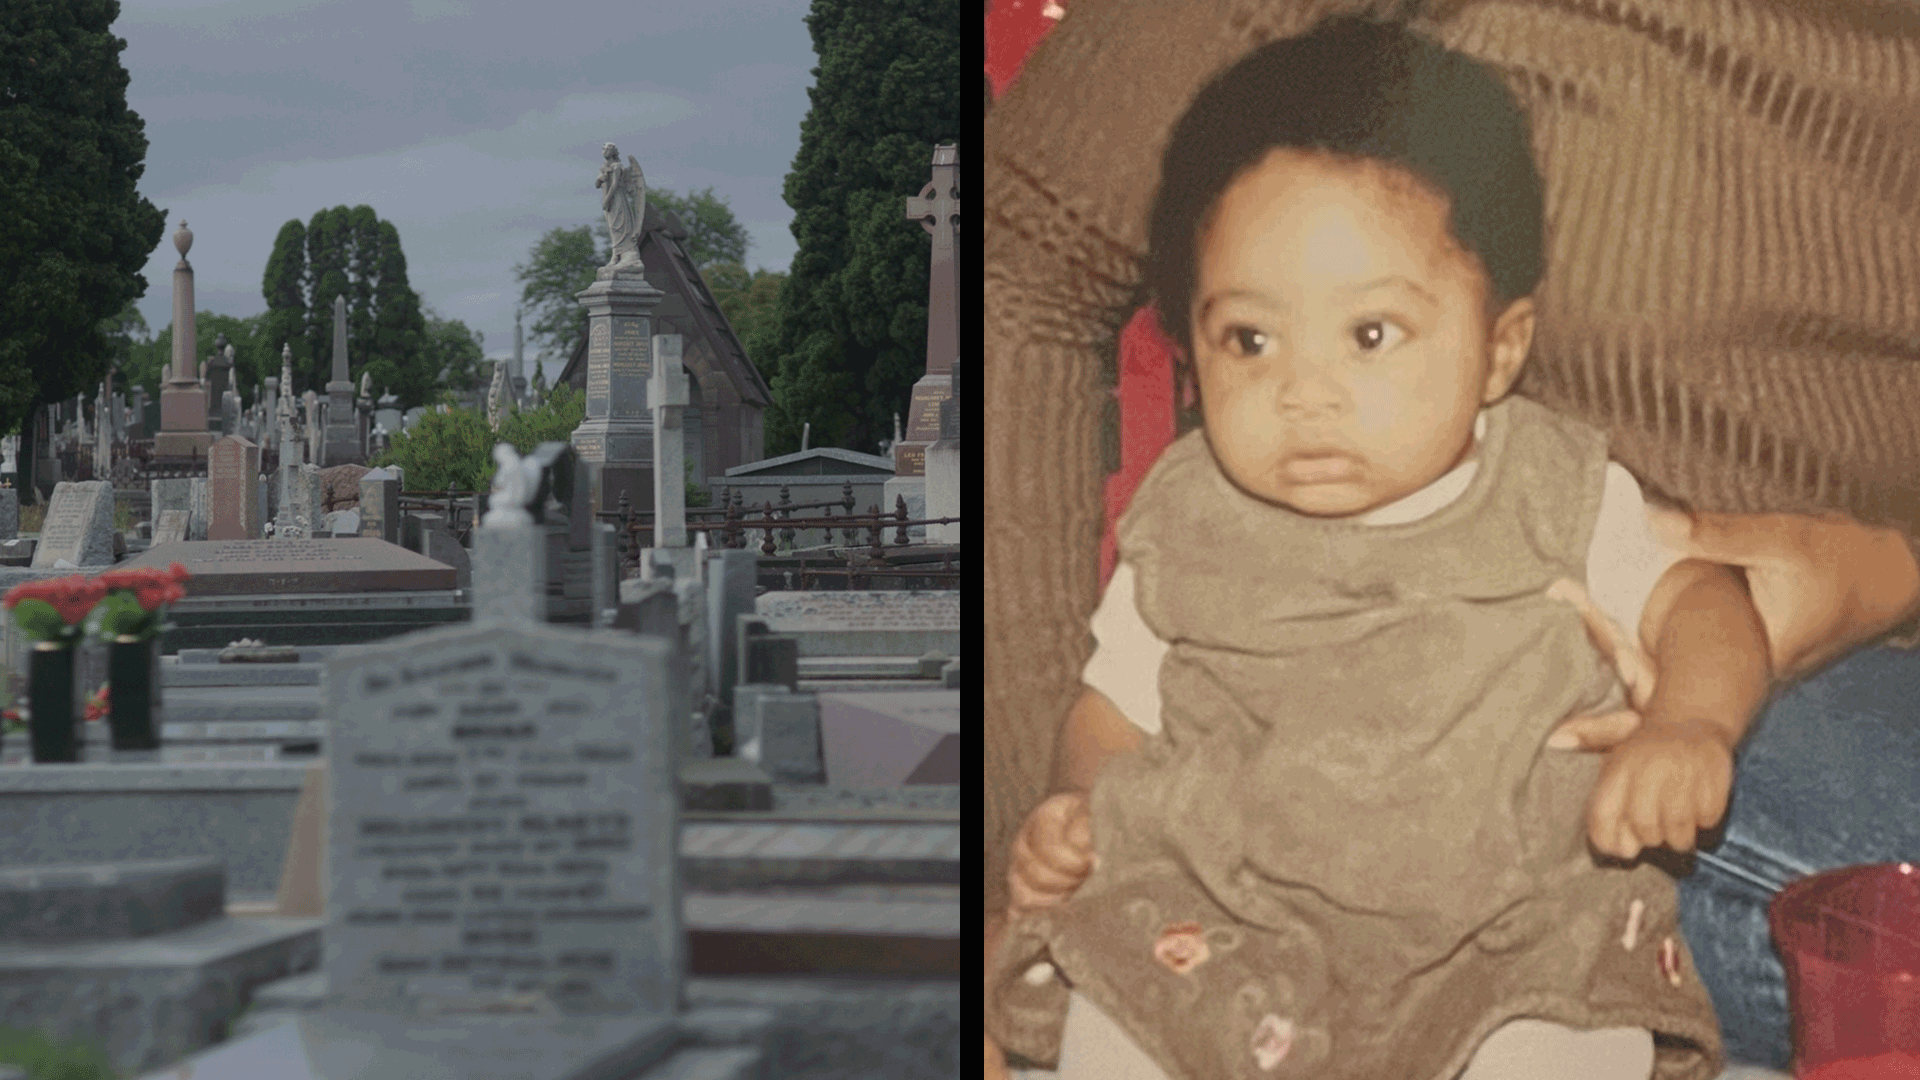 Disturbing Mystery: Six-Month-Old Child's Remains Vanish From Georgia Cemetery | TSR Investigates